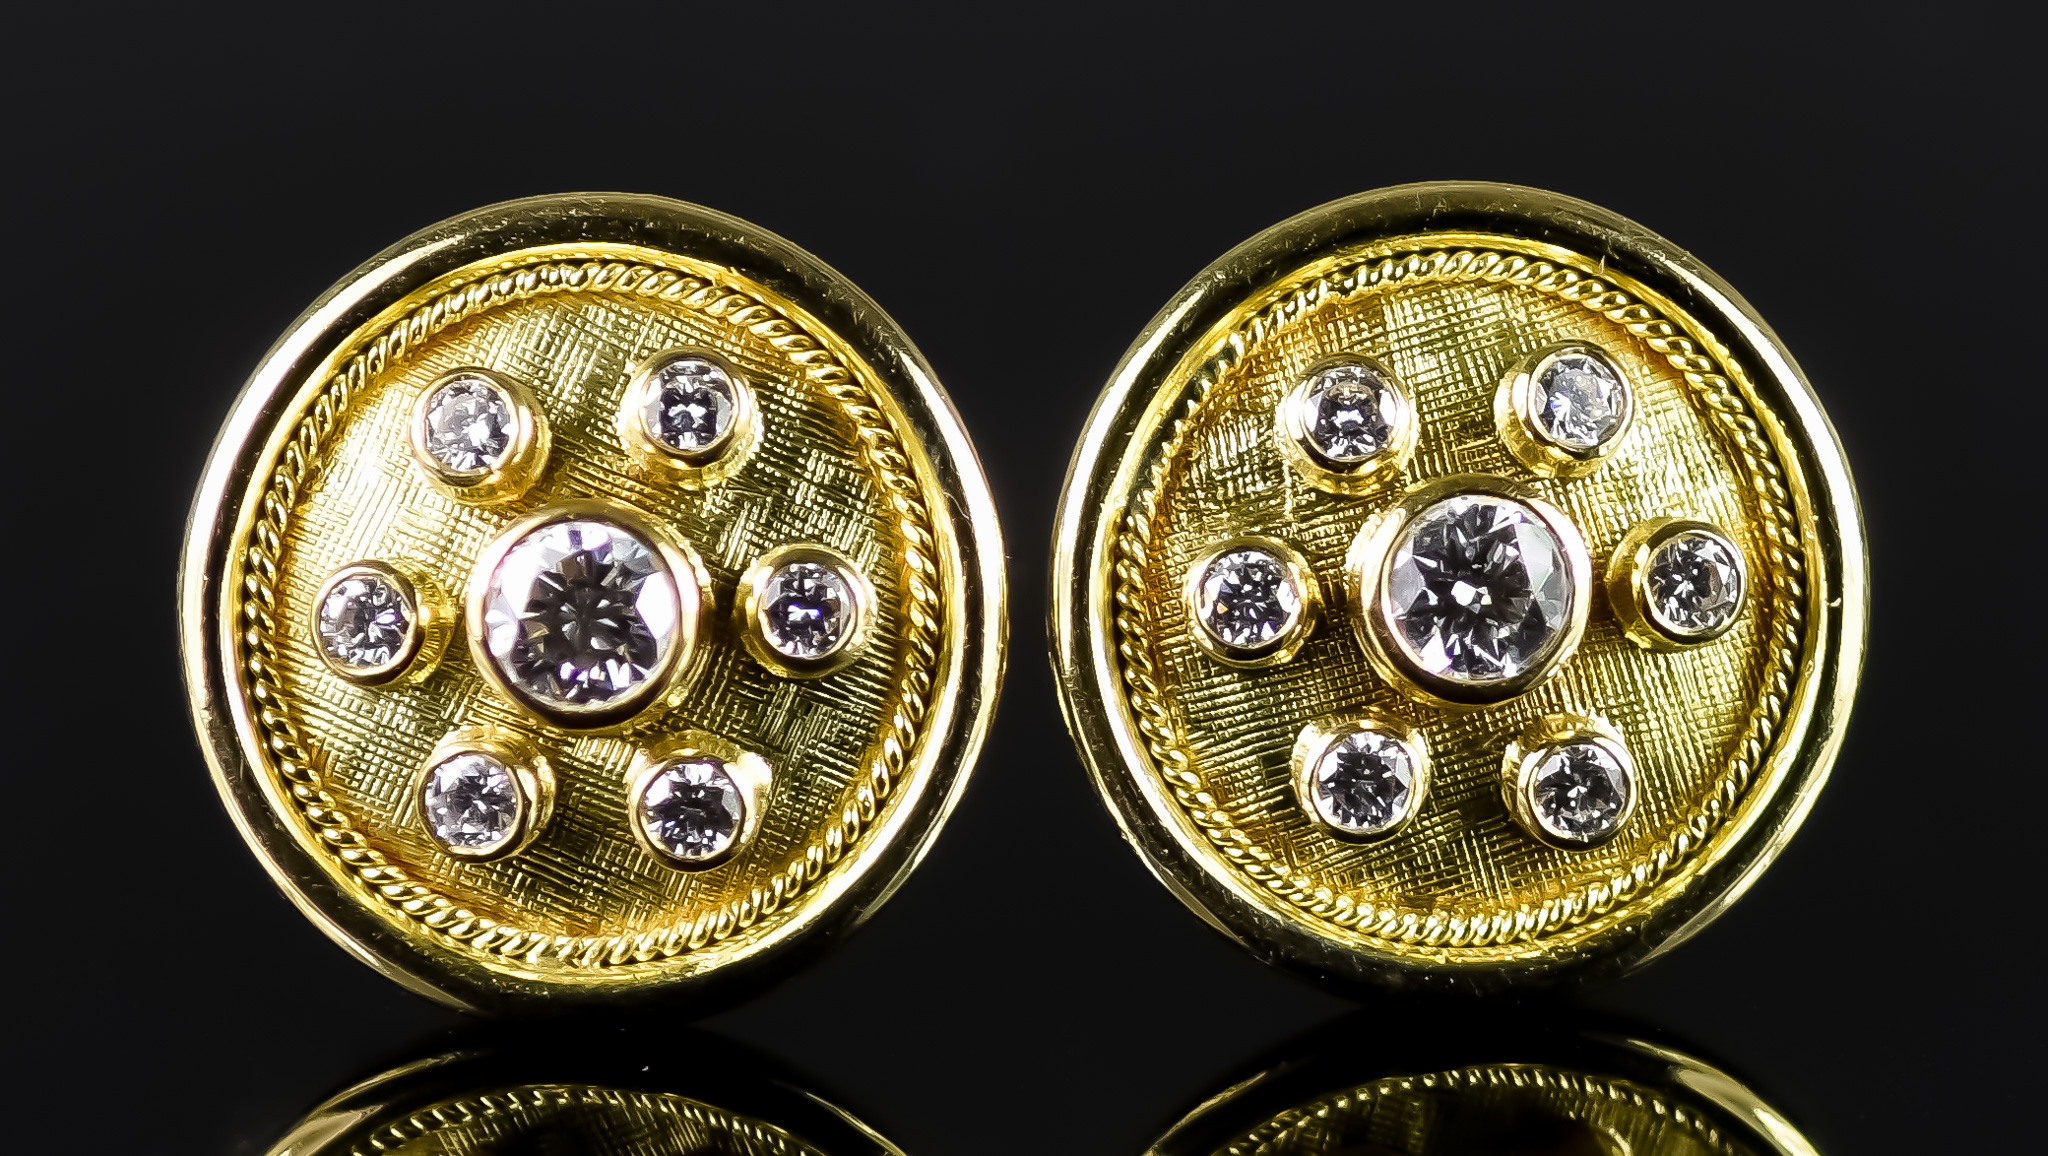 A Pair of 18ct Gold and Diamond Earrings, 20th Century, for pierced ears, each 20mm diameter, set